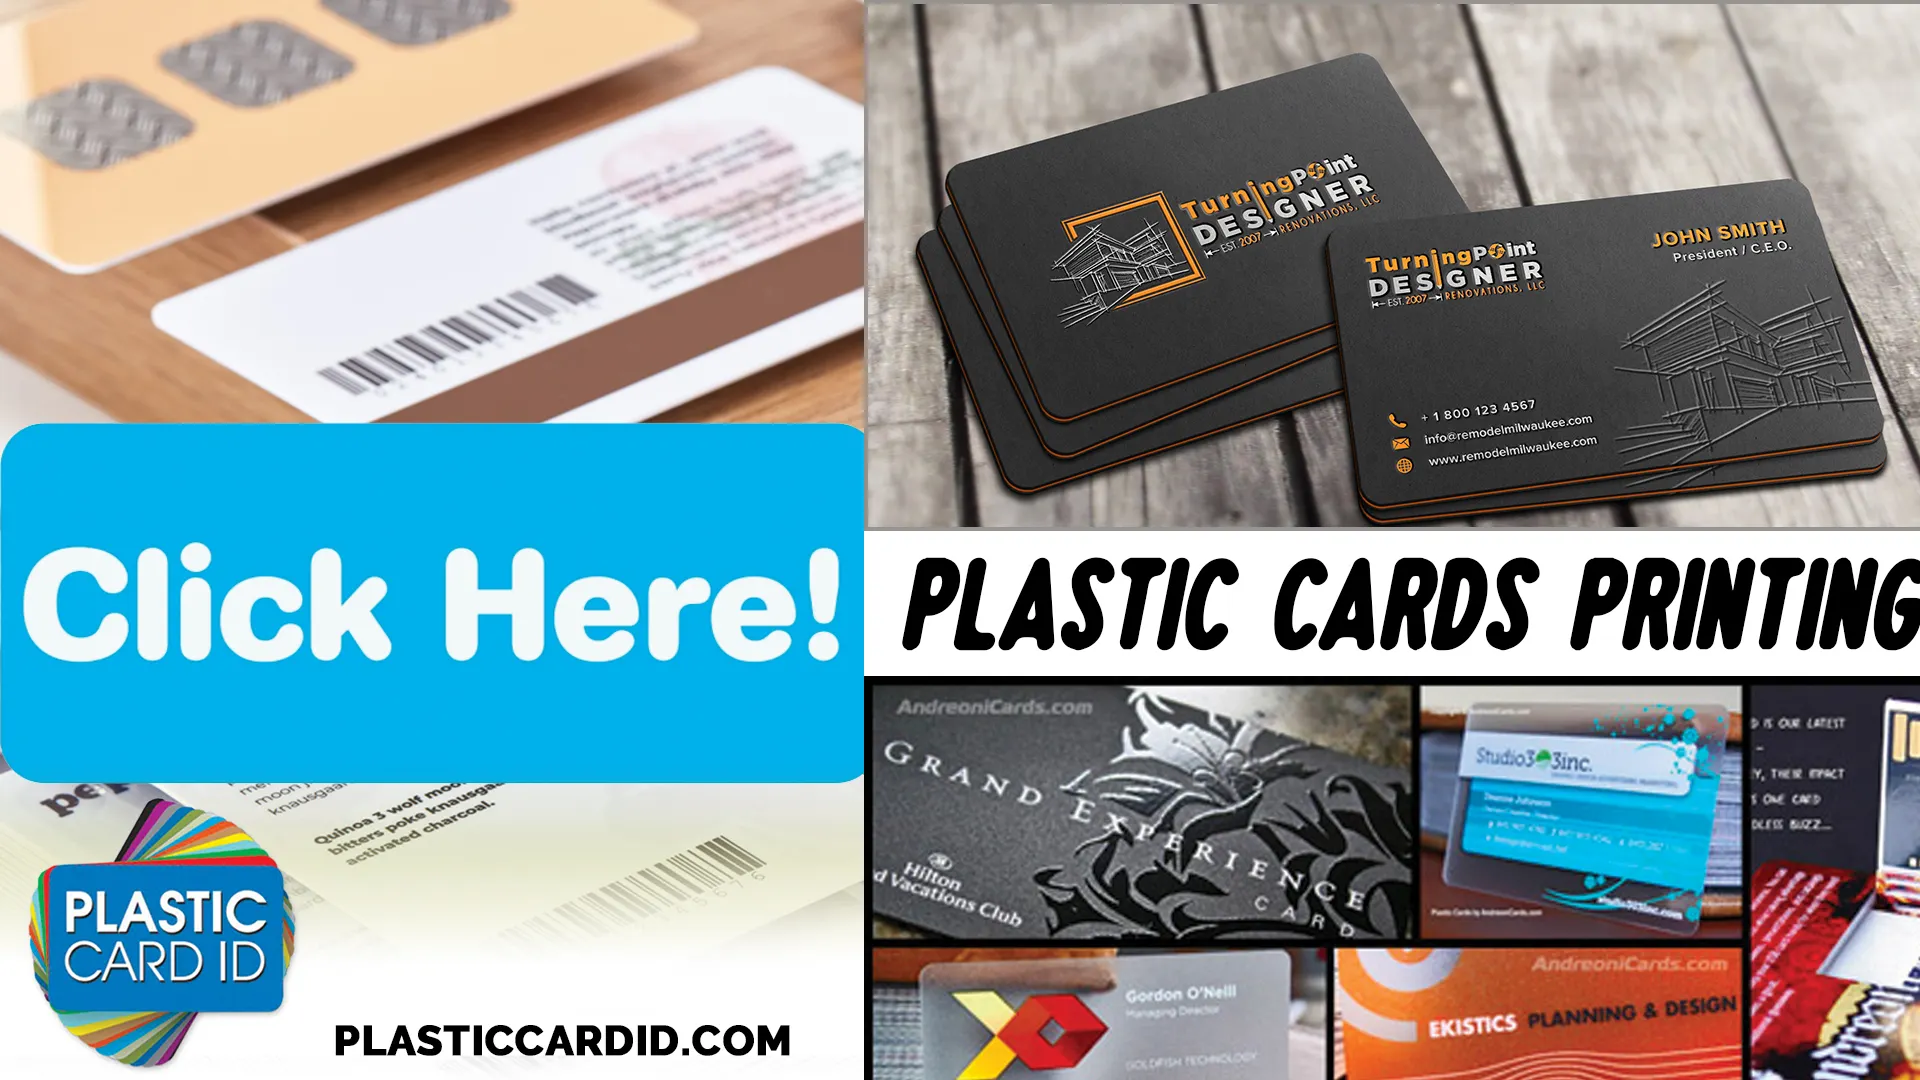 Welcome to the World of High-Quality Plastic Cards!